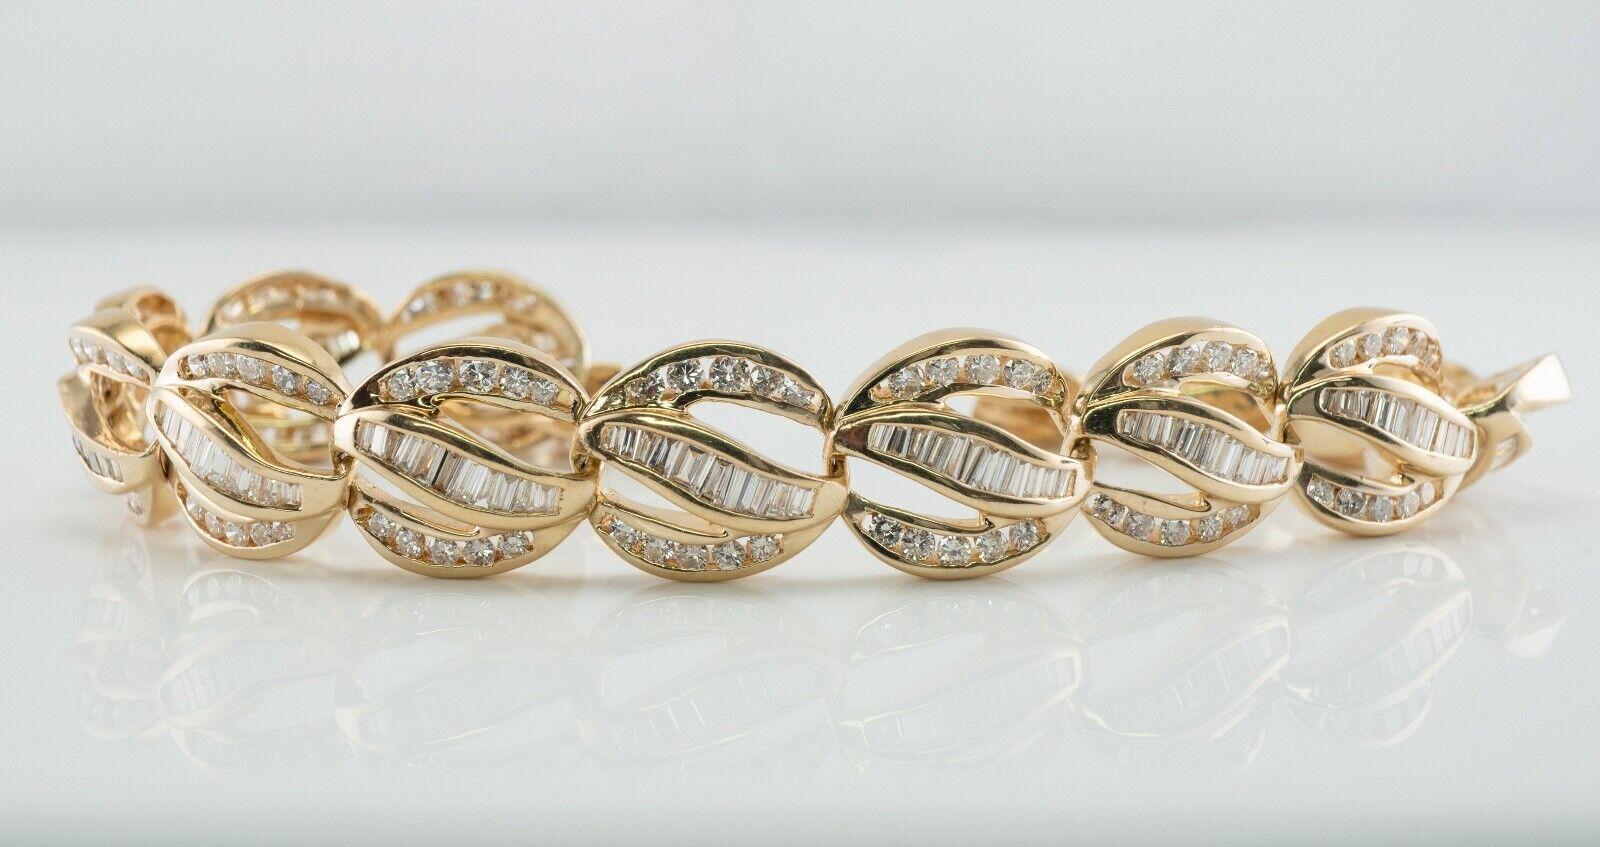 This gorgeous estate bracelet is crafted in solid 18K Yellow Gold and set with white and fiery diamonds. Fourteen links hold 10 round brilliant cut diamonds and 12 channel set diamonds. The grand total for all diamonds is 6.44 carats of VS2-SI1